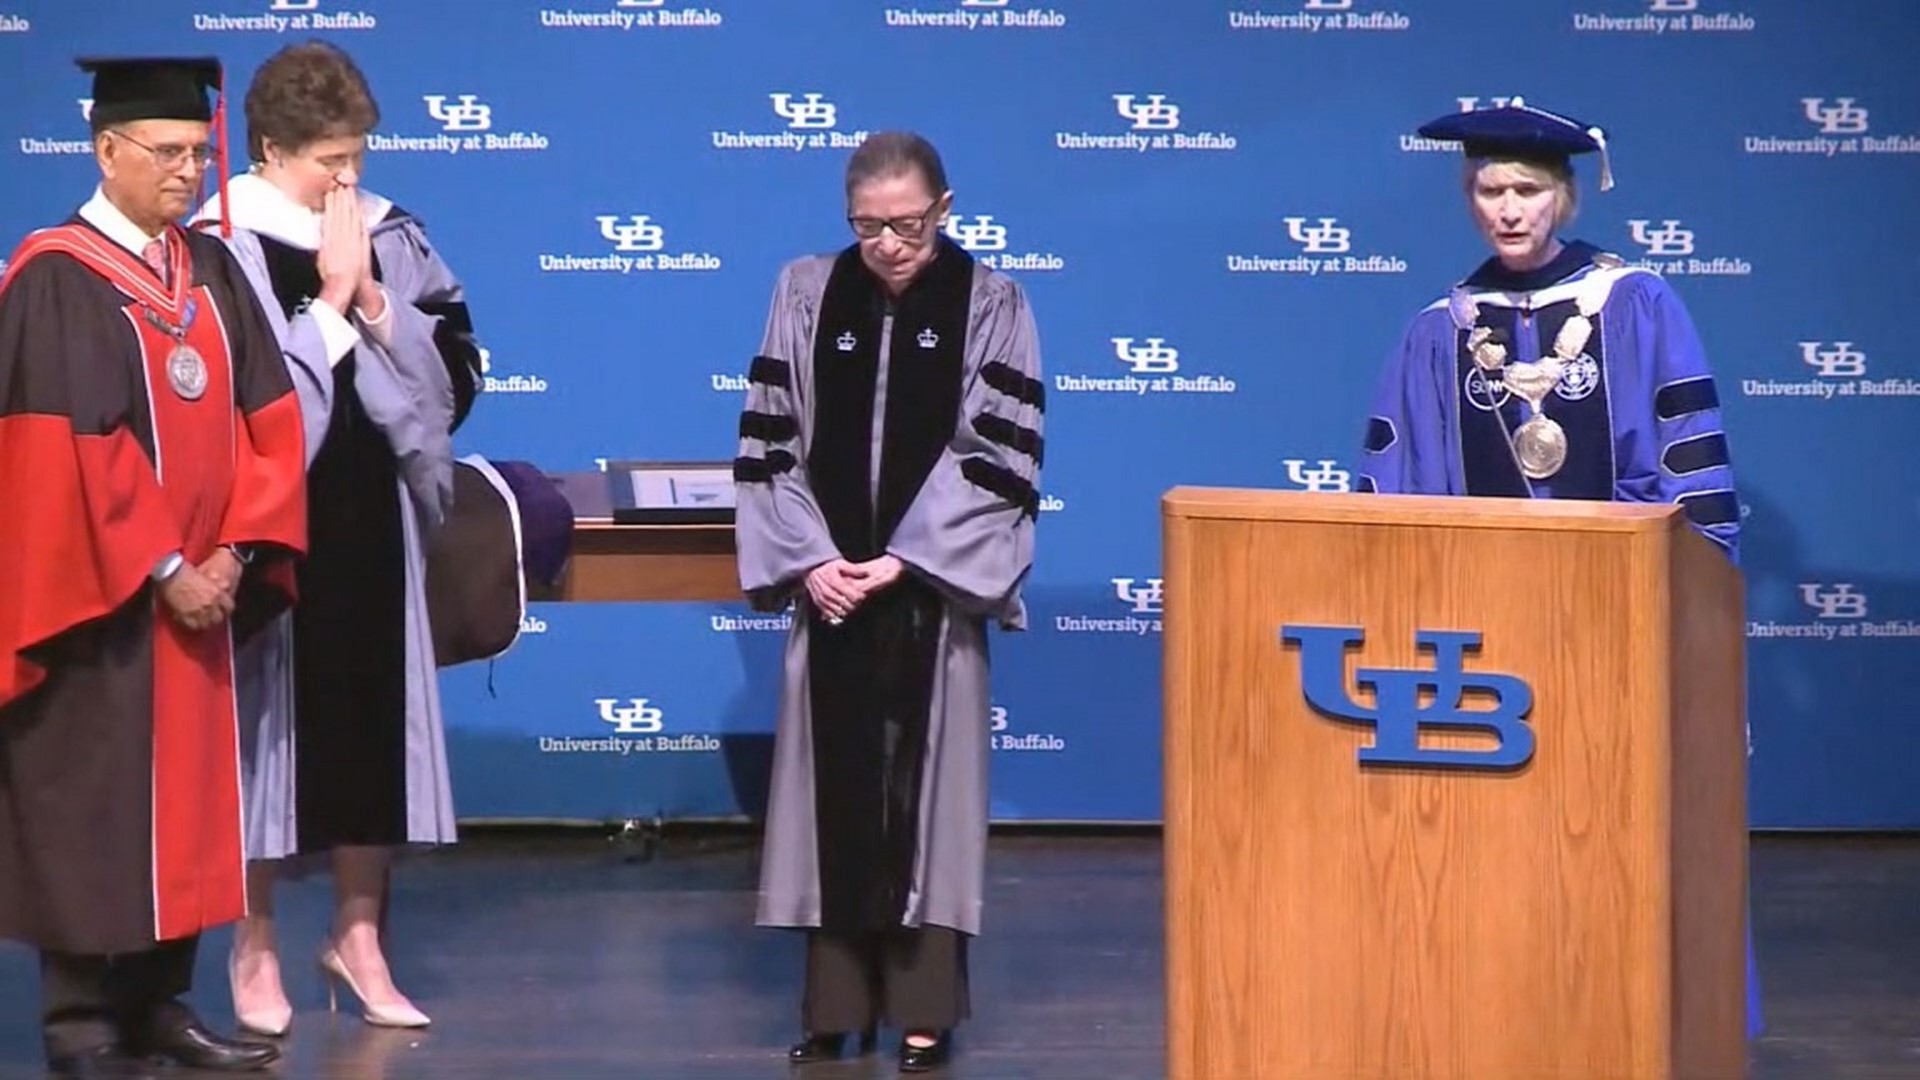 Justice Ruth Bader Ginsburg made her first public appearance on Monday since it was announced that she had undergone recent treatment for pancreatic cancer. Ginsburg received an honorary degree from the University at Buffalo.